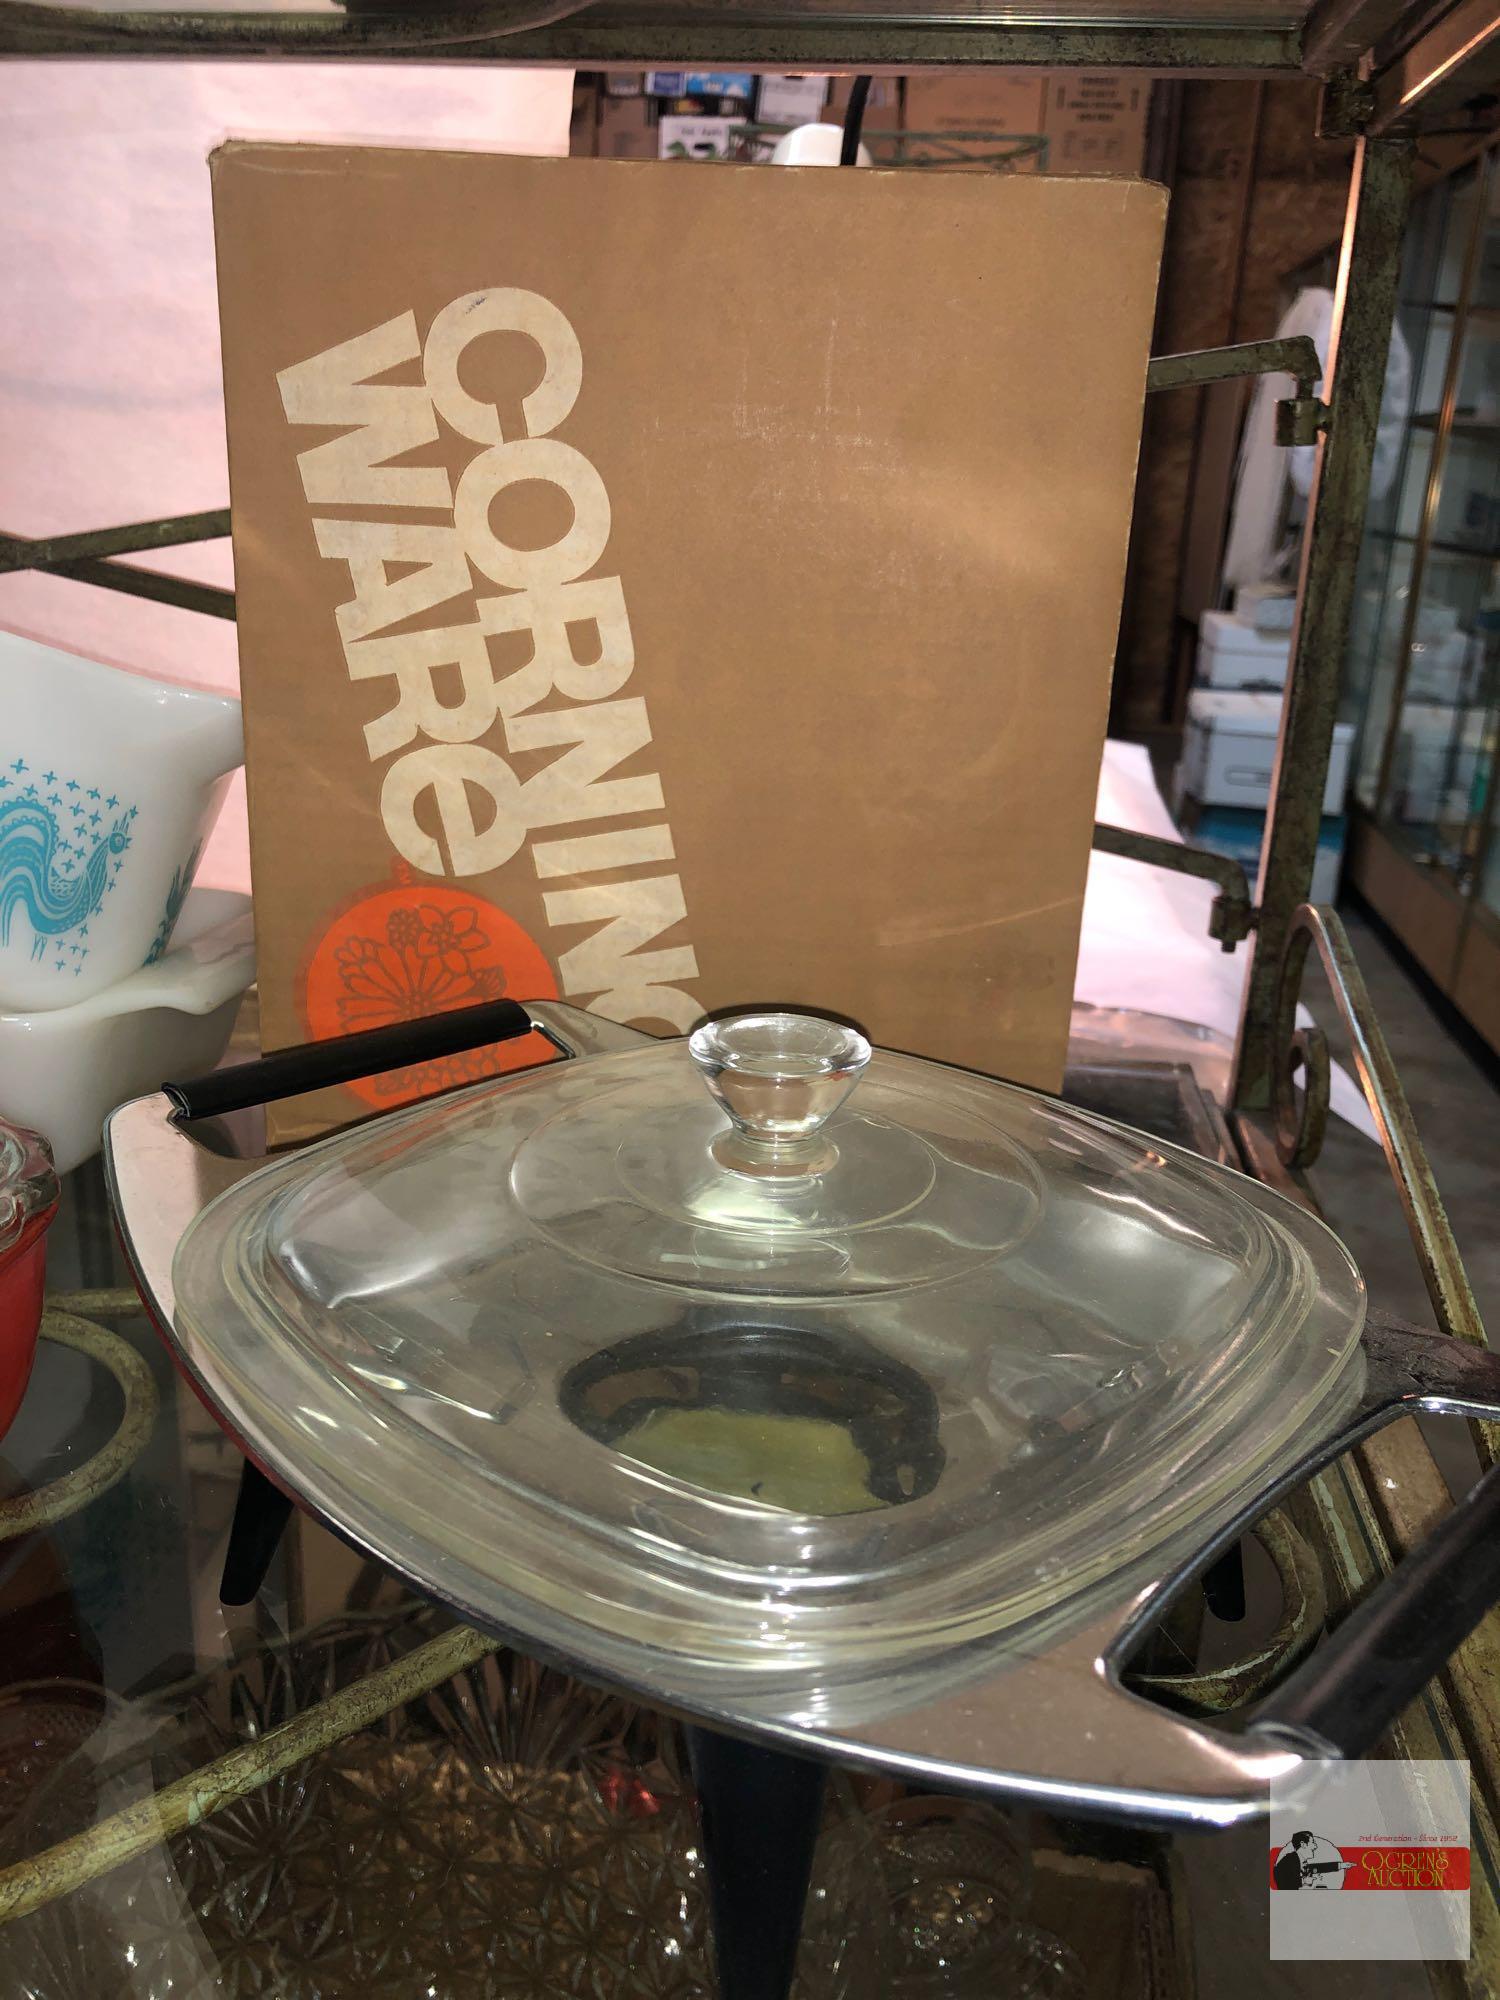 Cookware/bakeware - Pyrex casserole dishes and lids, Corning warming stand with lid but no dish